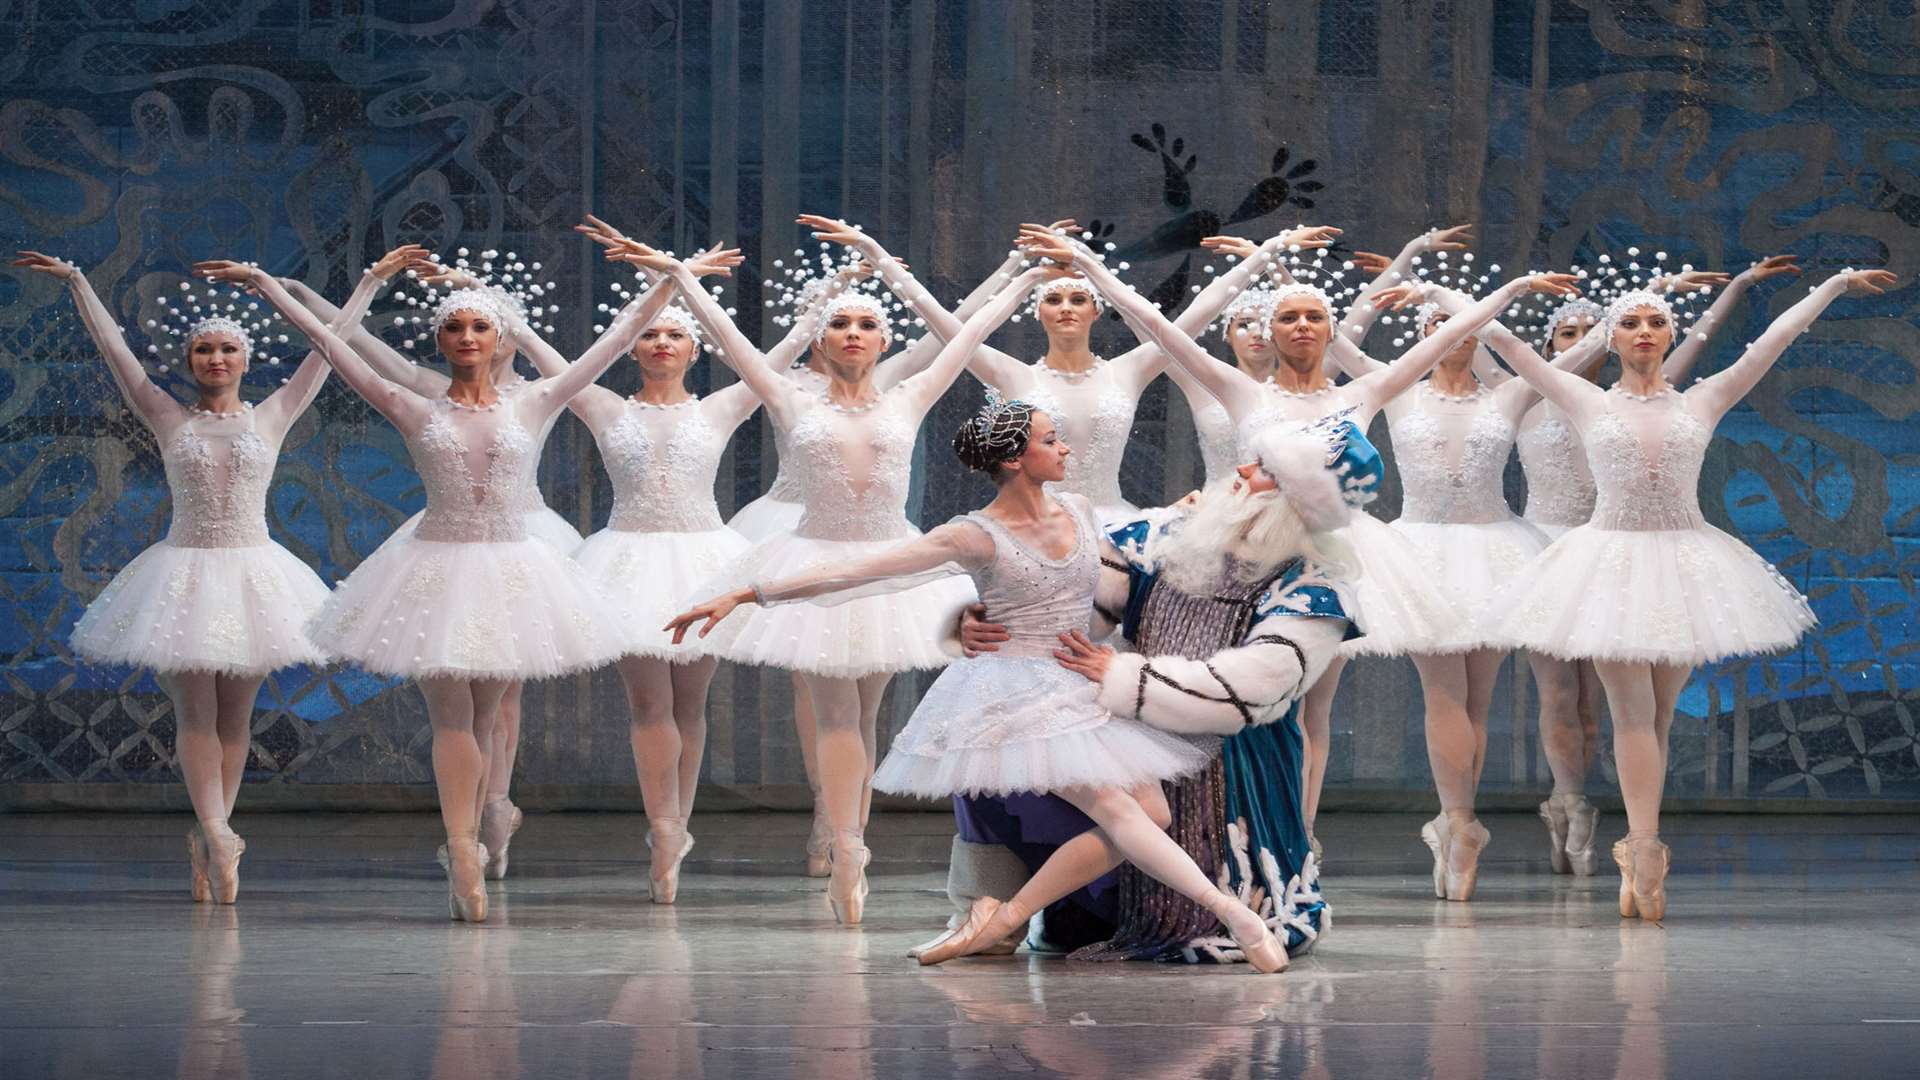 The Russian State Ballet of Siberia's performance of the Snow Maiden, which will be at the Marlowe Theatre in Canterbury